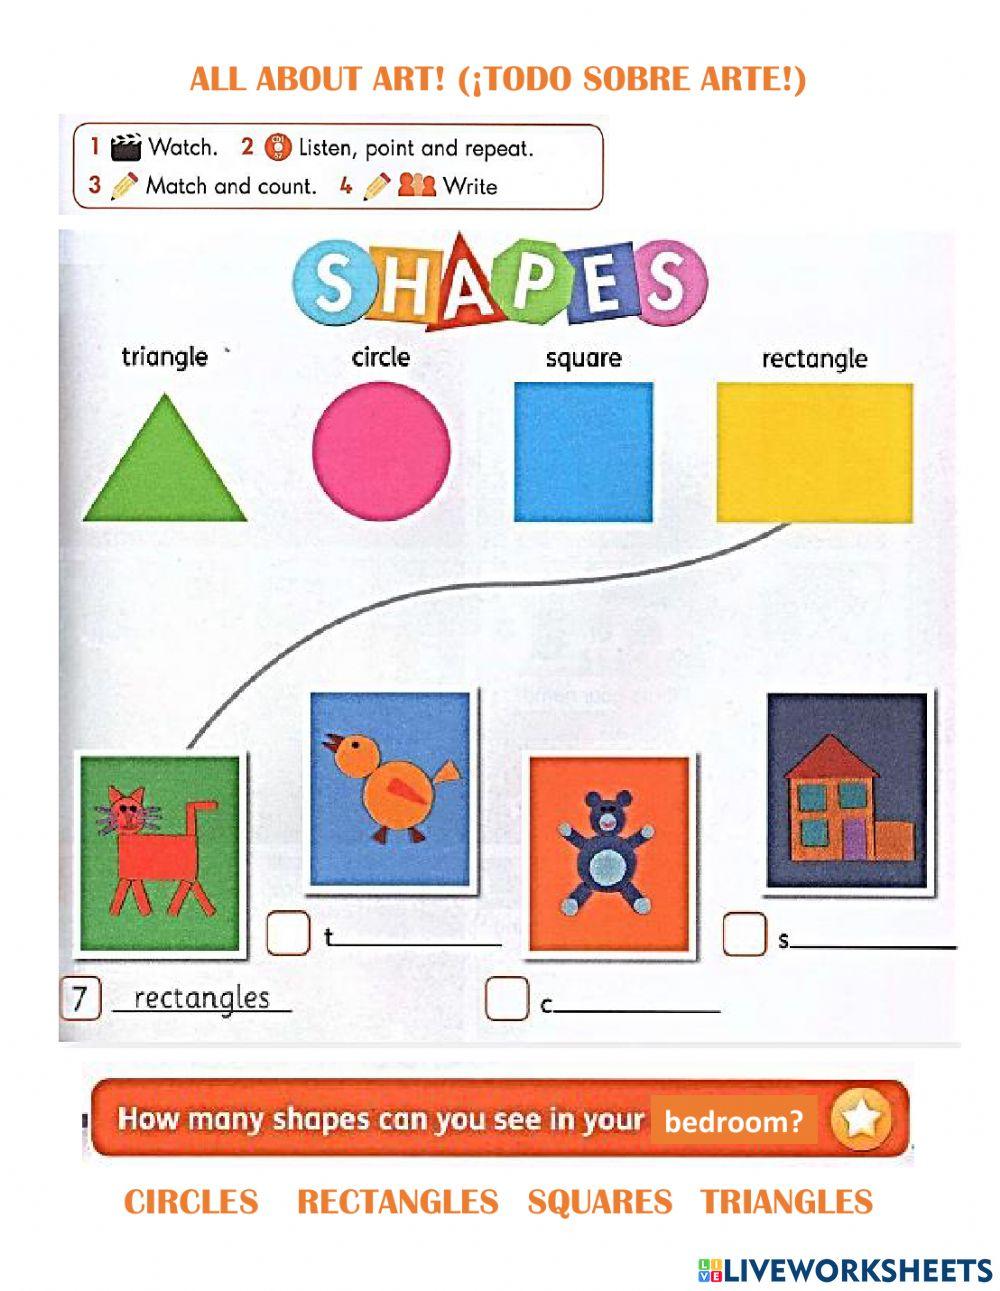 All about art - shapes